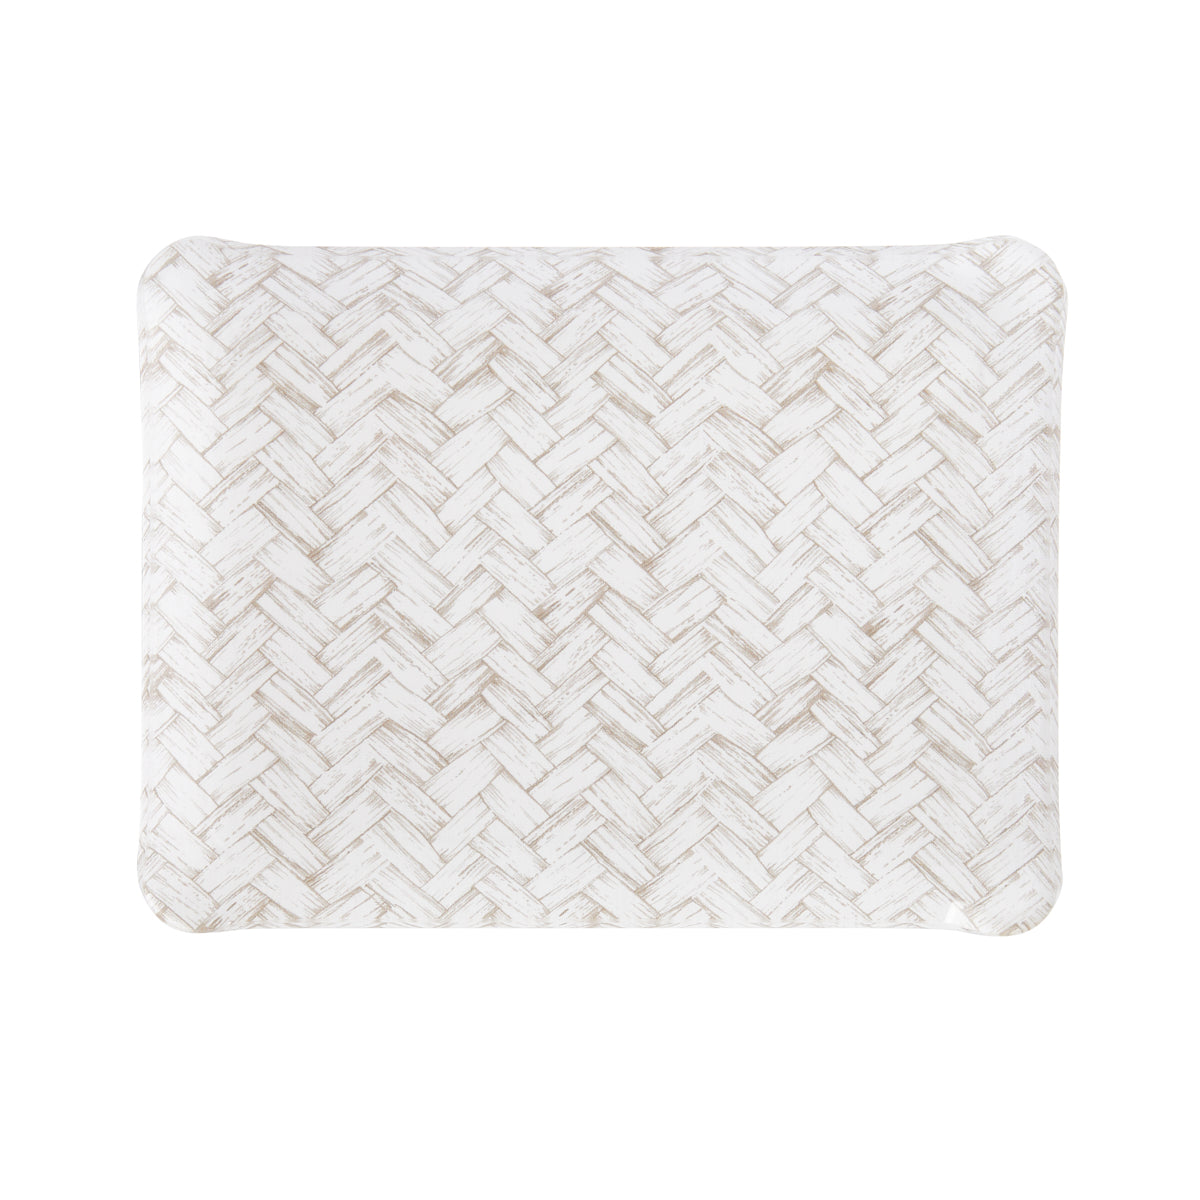 Nina Campbell Fabric Tray Small 24X18 - Basketweave Beige